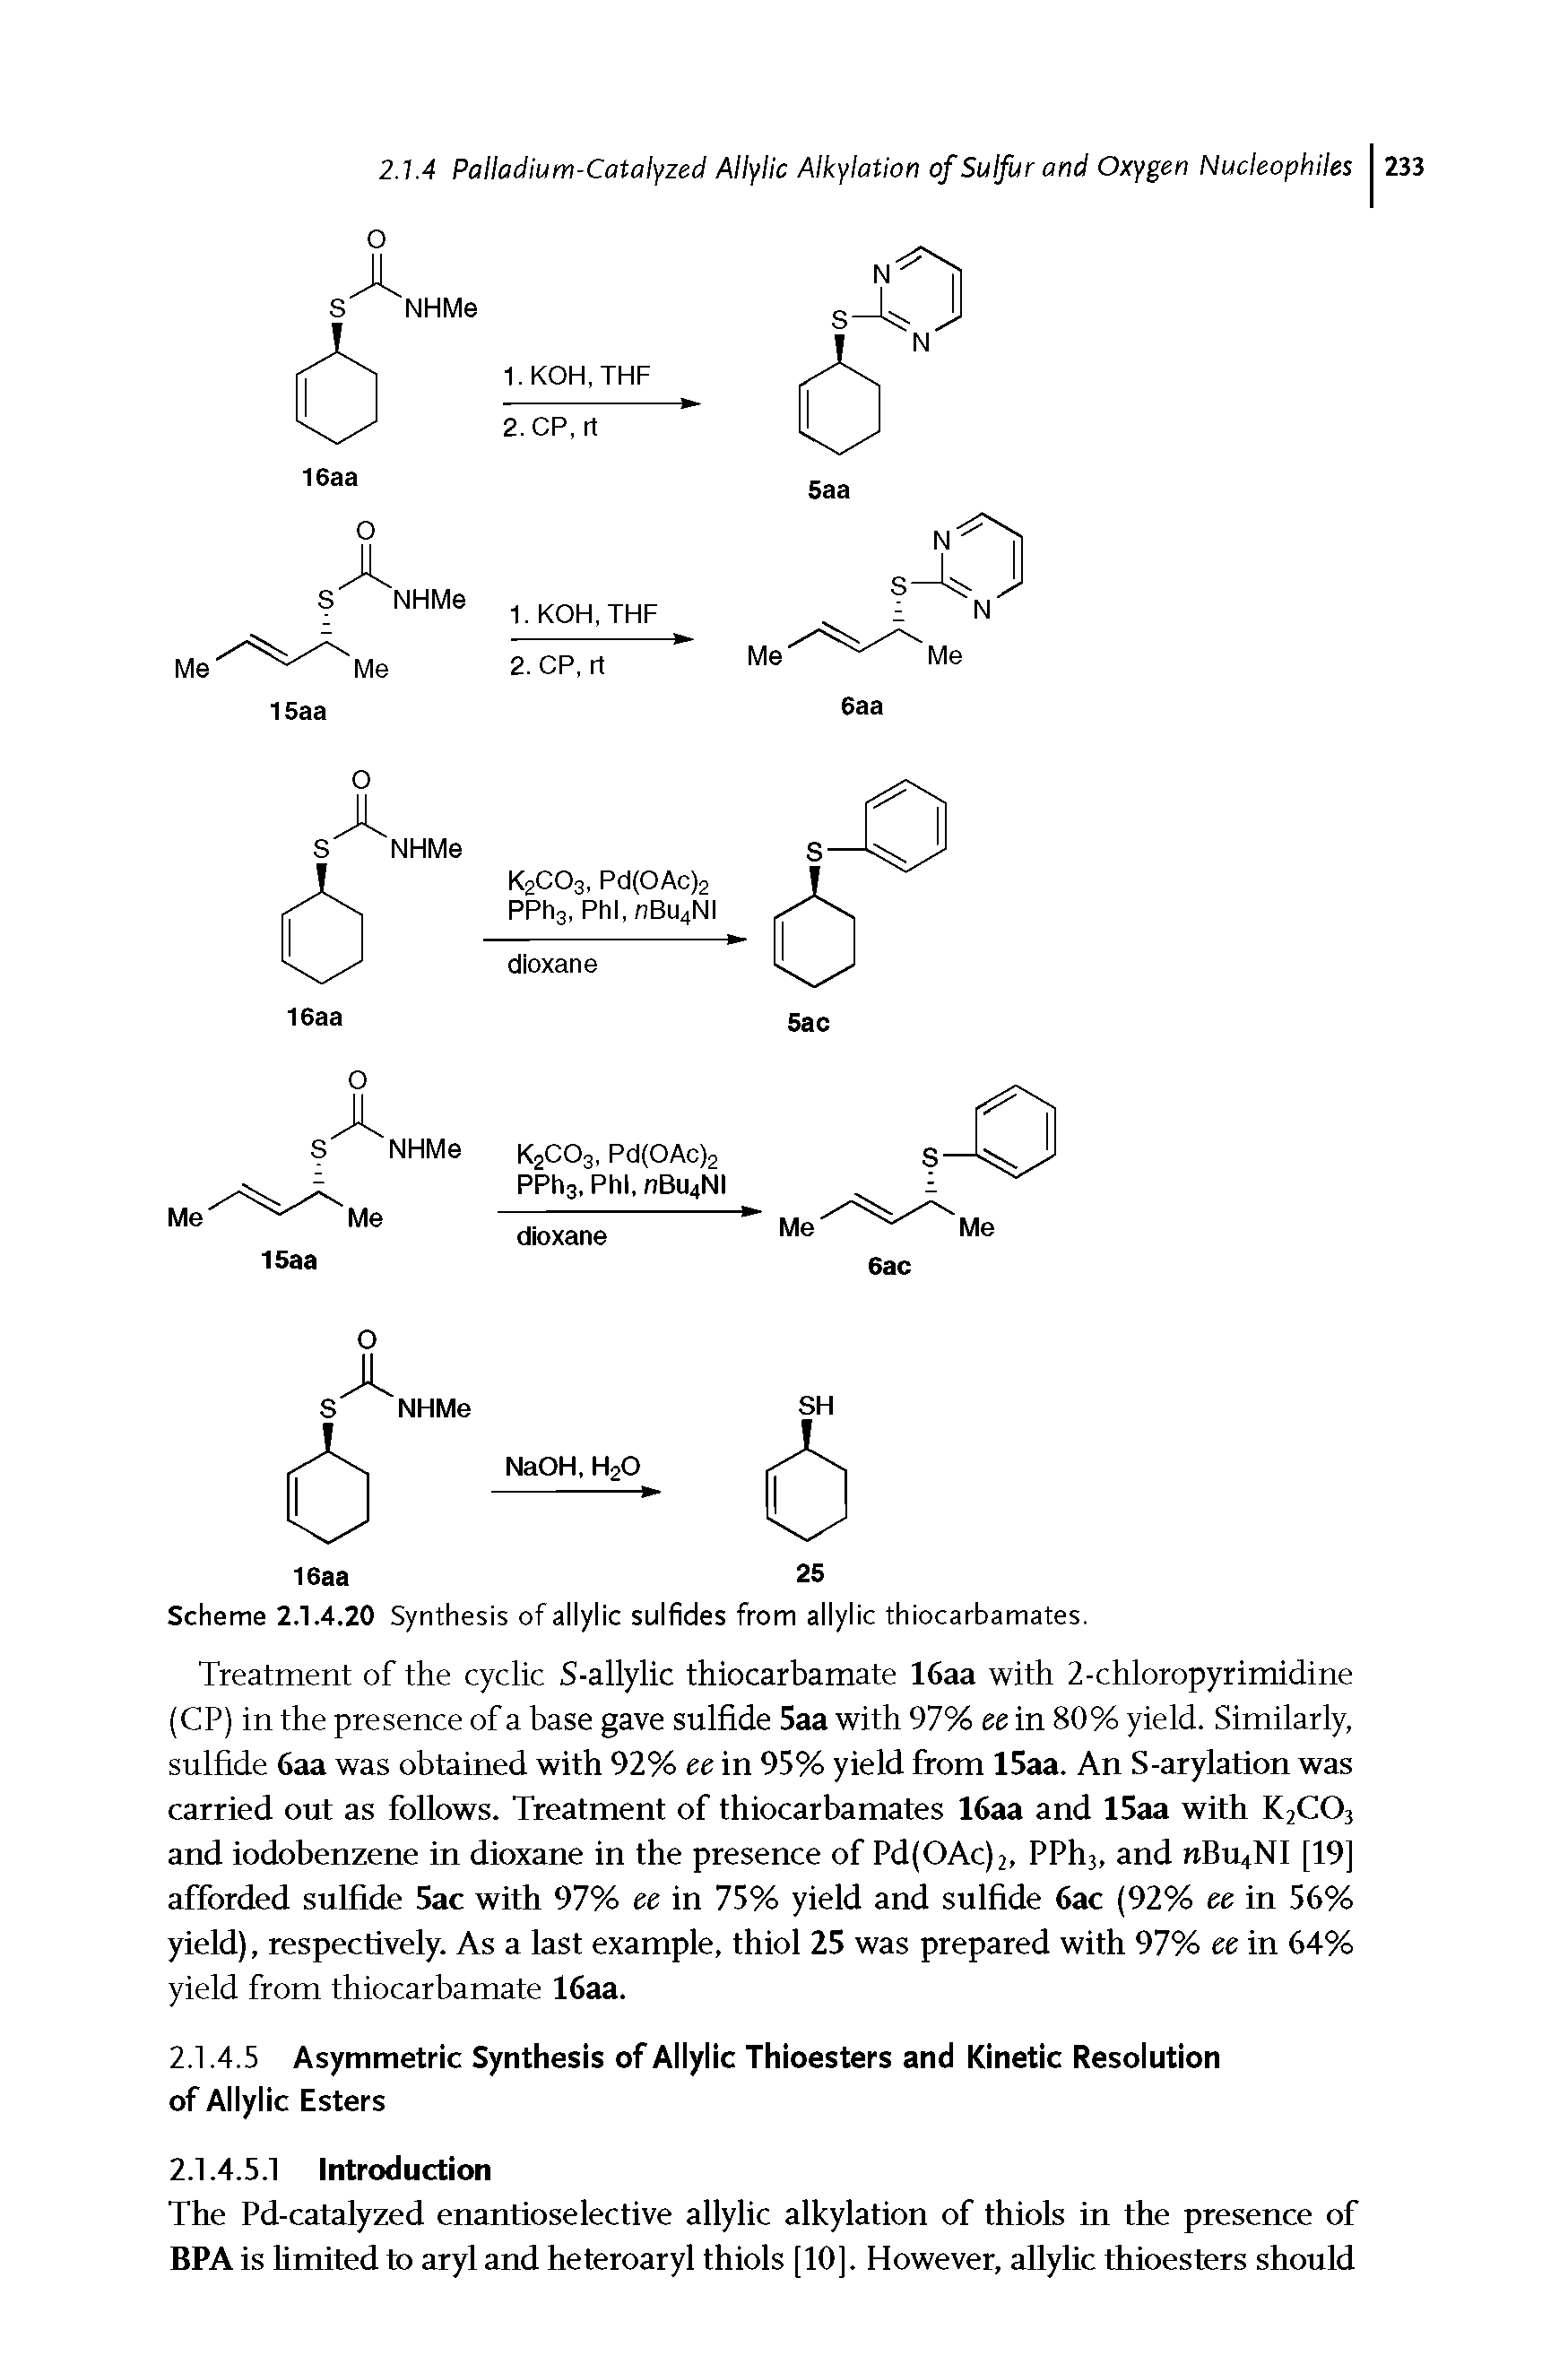 Scheme 2.1.4.20 Synthesis of allylic sulfides from allylic thiocarbamates.